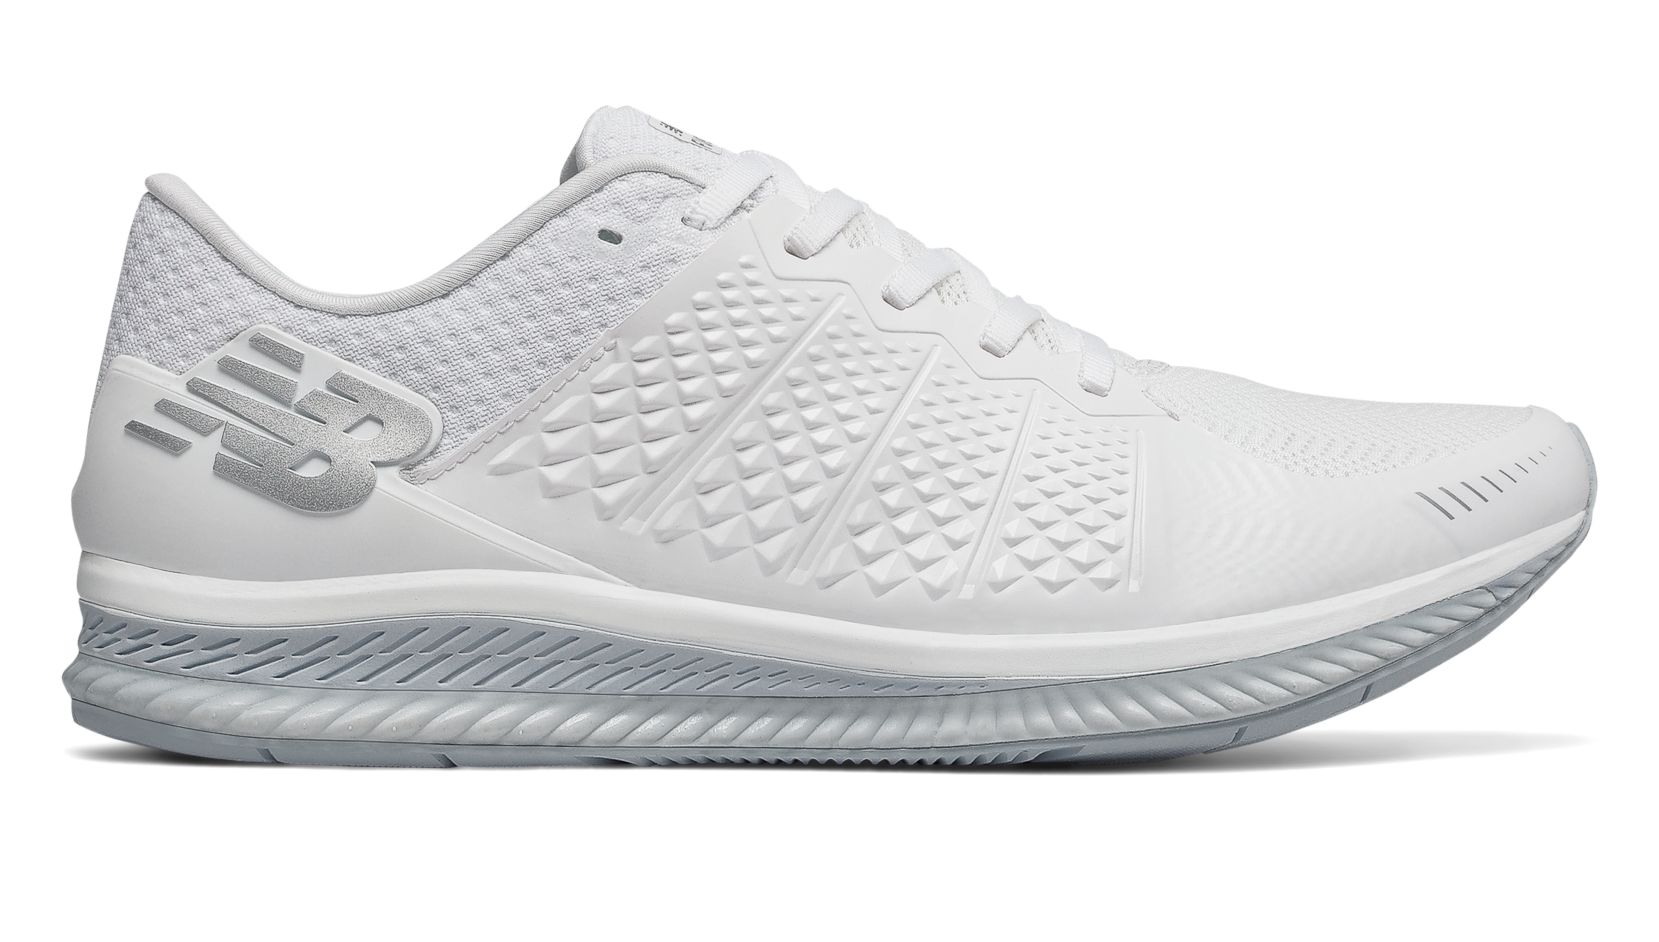 all white sports shoes